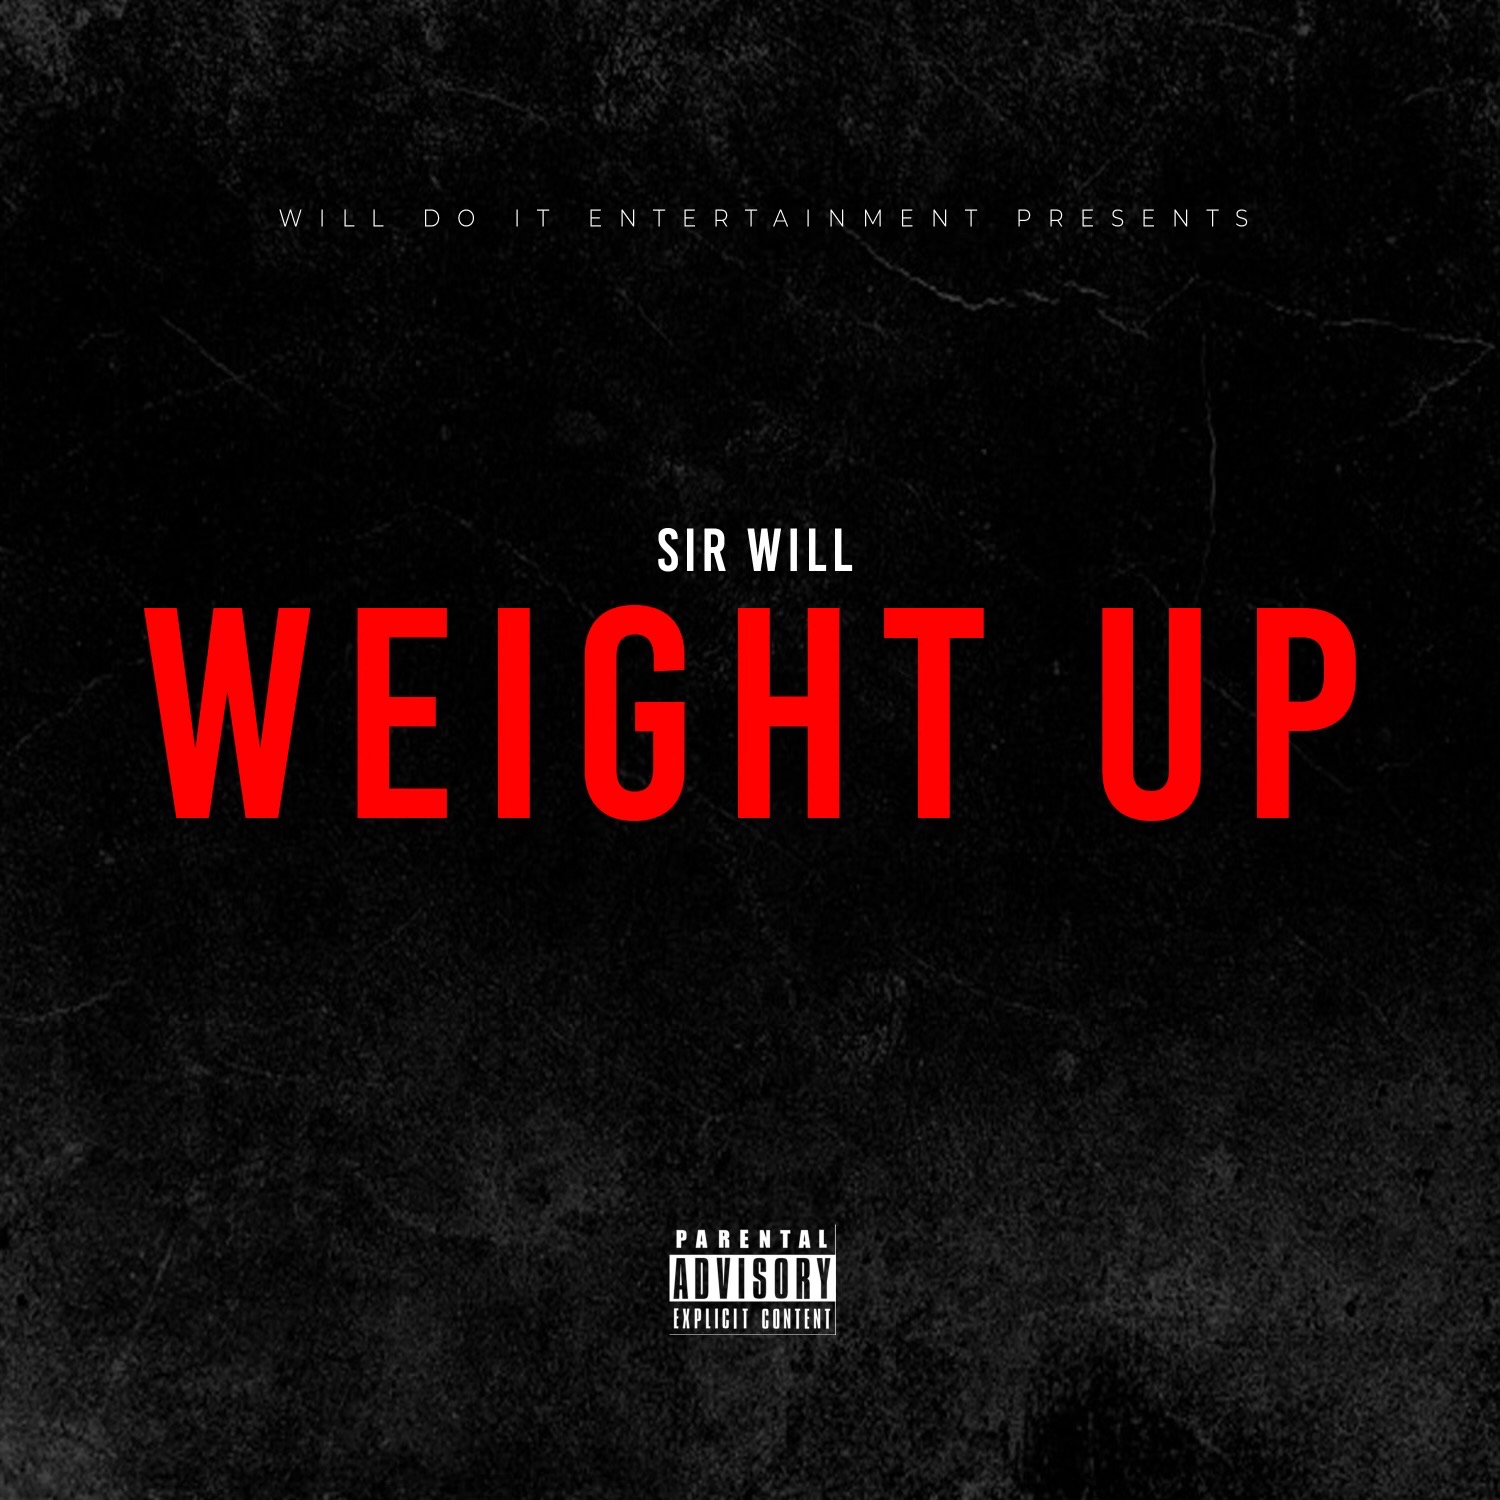 Art for Weight Up by Sir Will